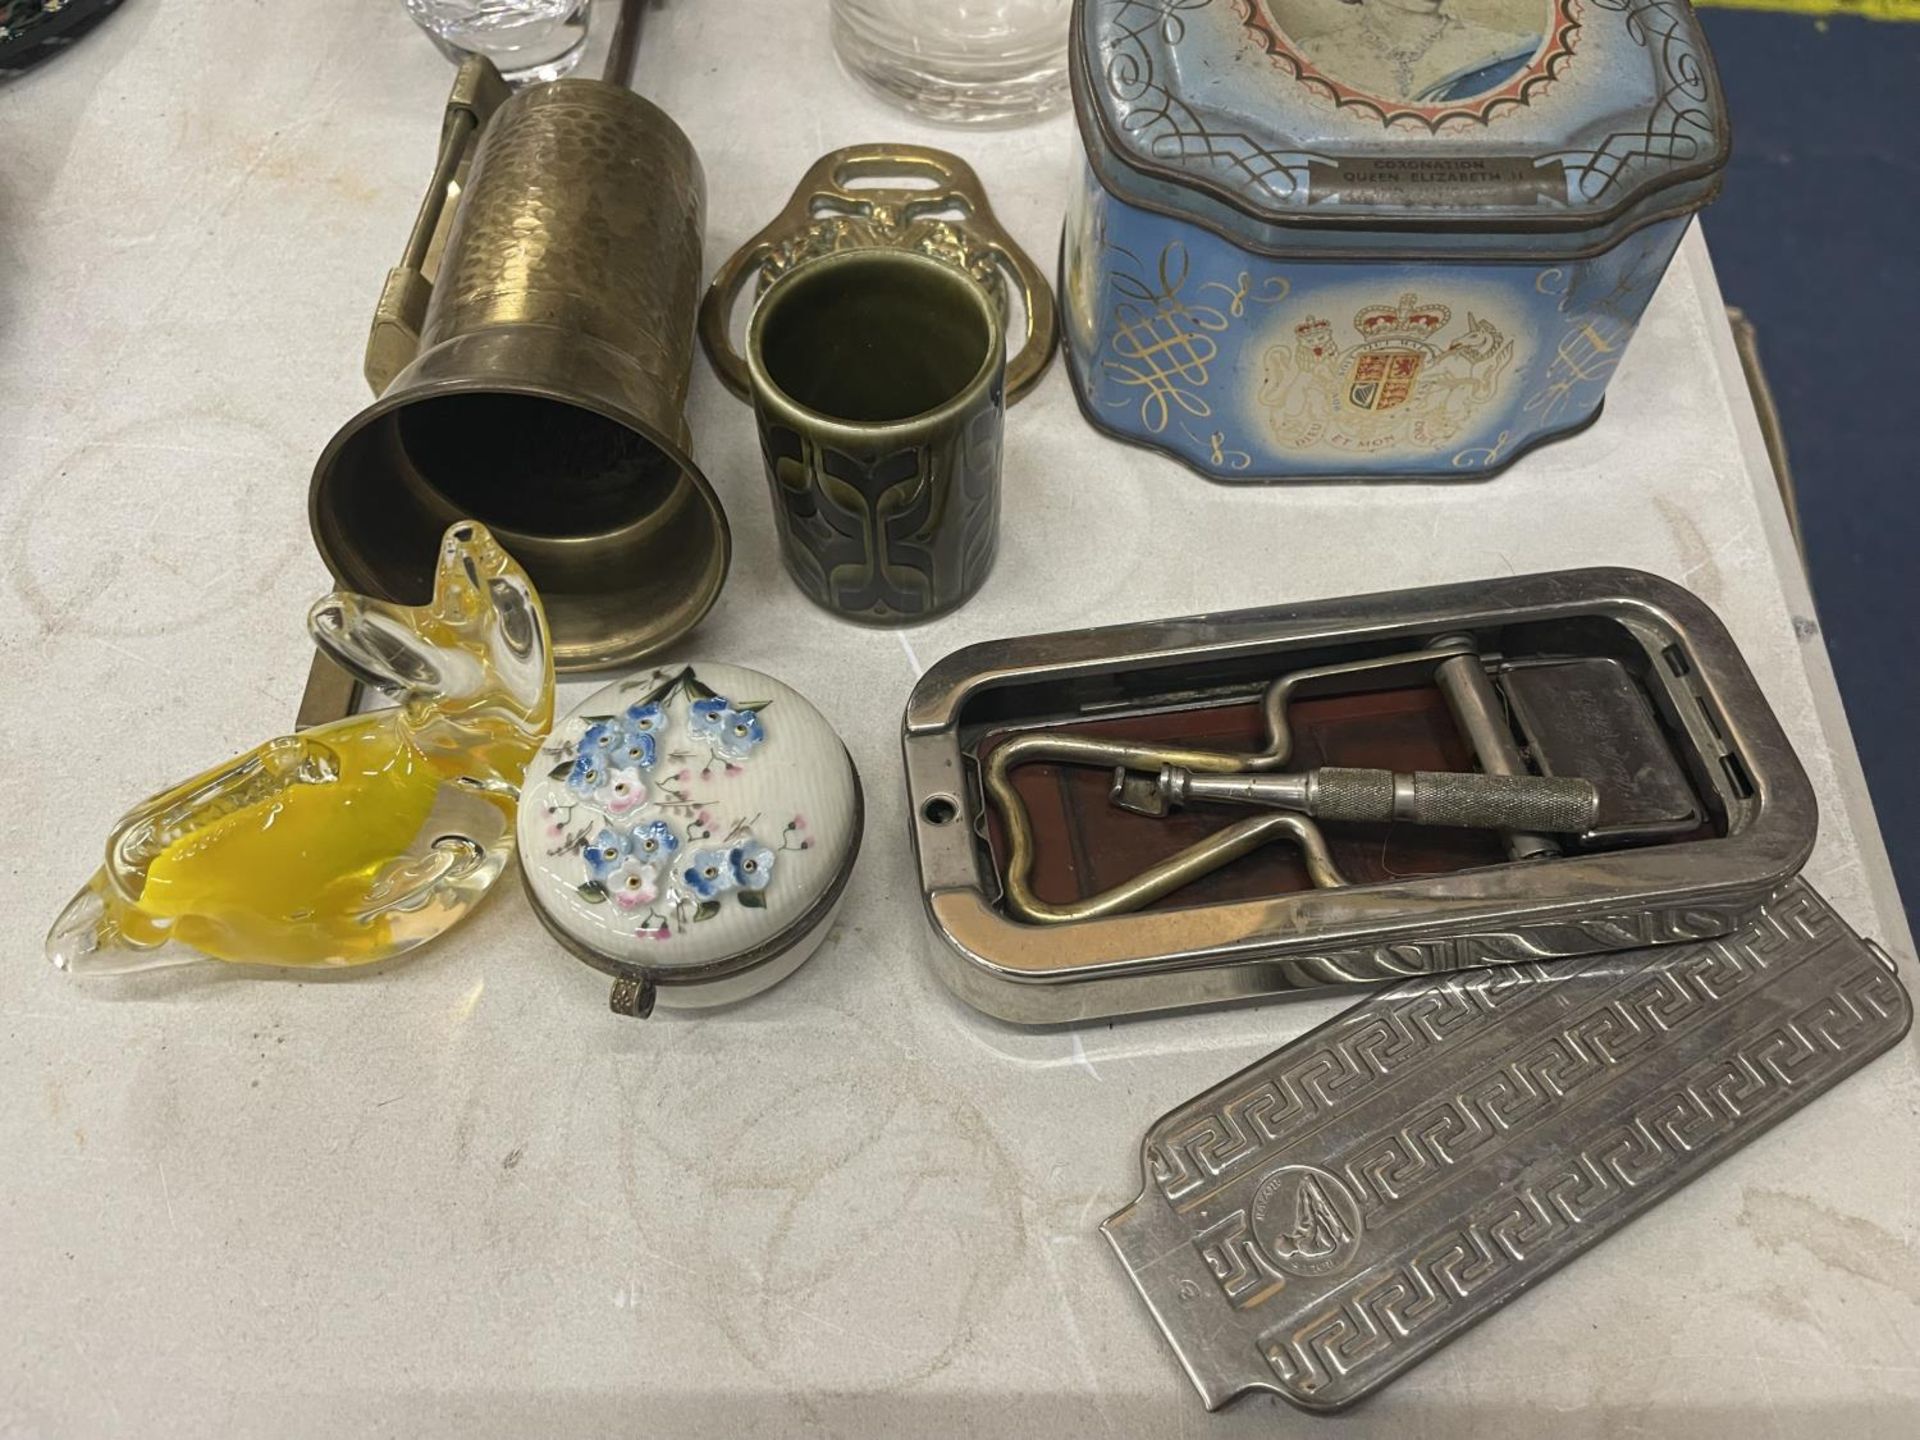 A MIXED LOT TO INCLUDE A VINTAGE RAZOR, TUMBLER GLASSES, BLACK GLASS BOWLS, BRASS ITEMS, ETC - Image 2 of 4